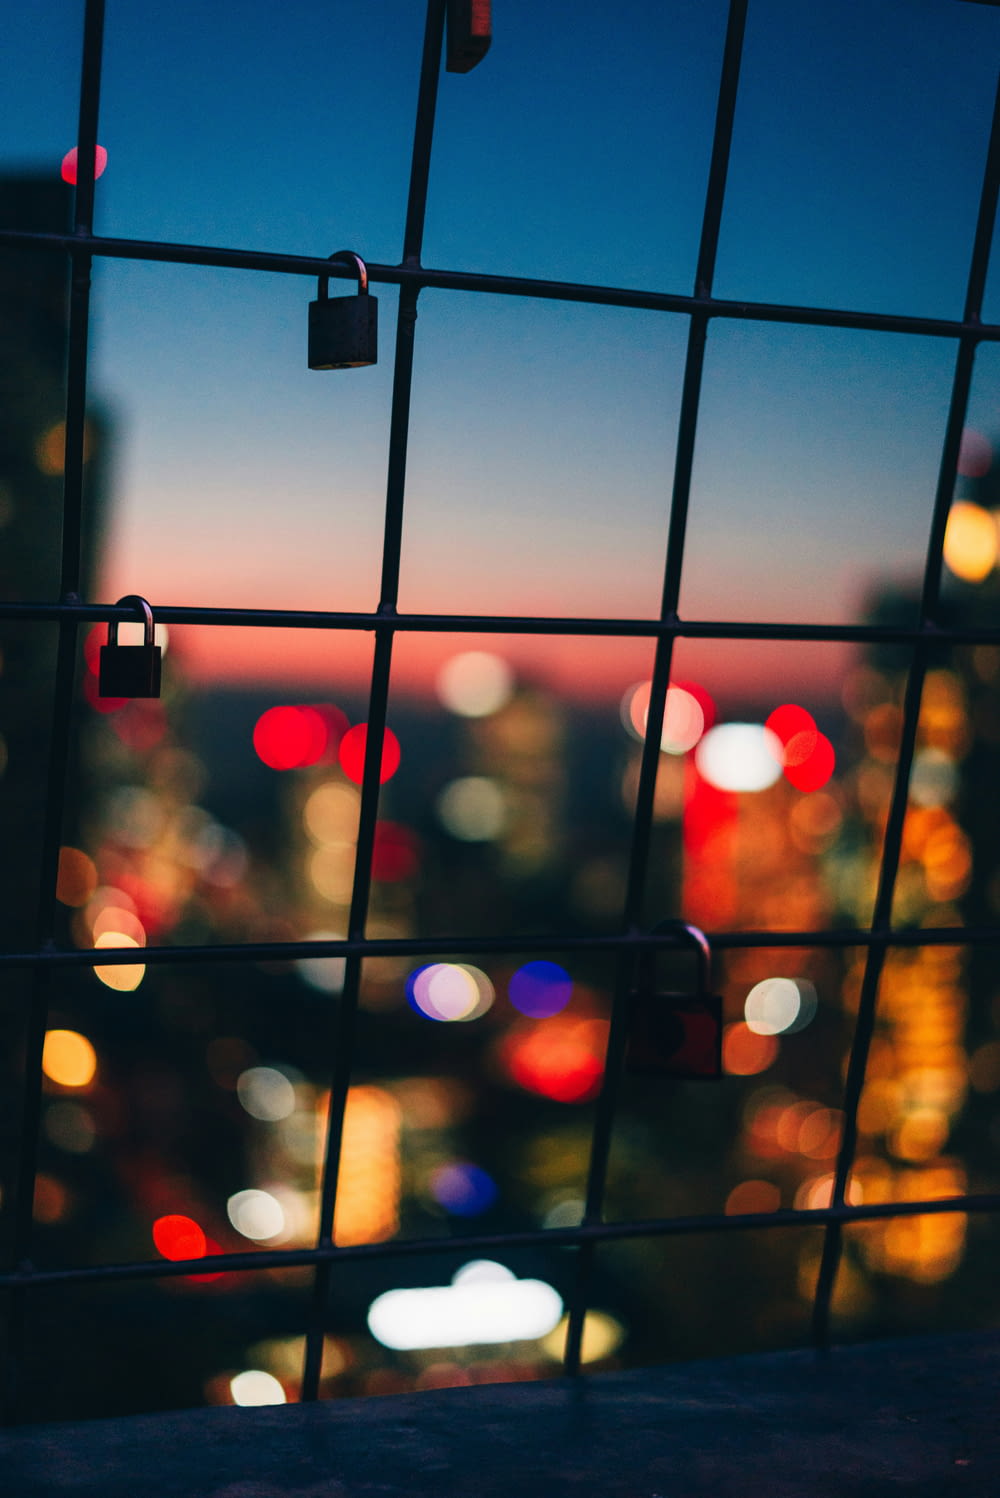 a view of a city at night through a fence